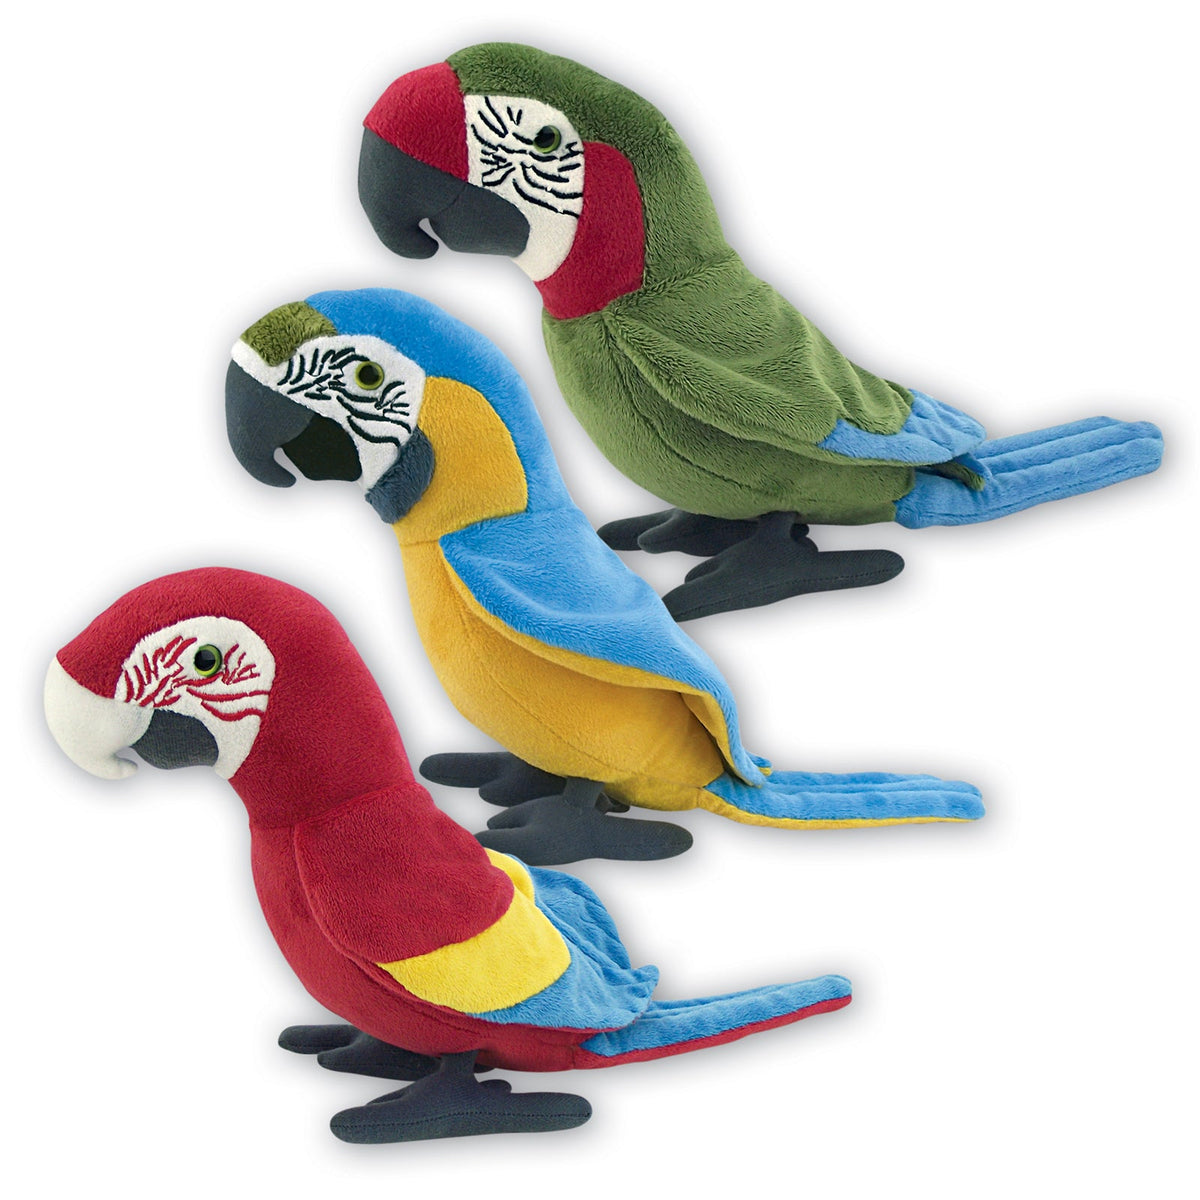 22cm Macaw Parrot Soft Toy Stuffed